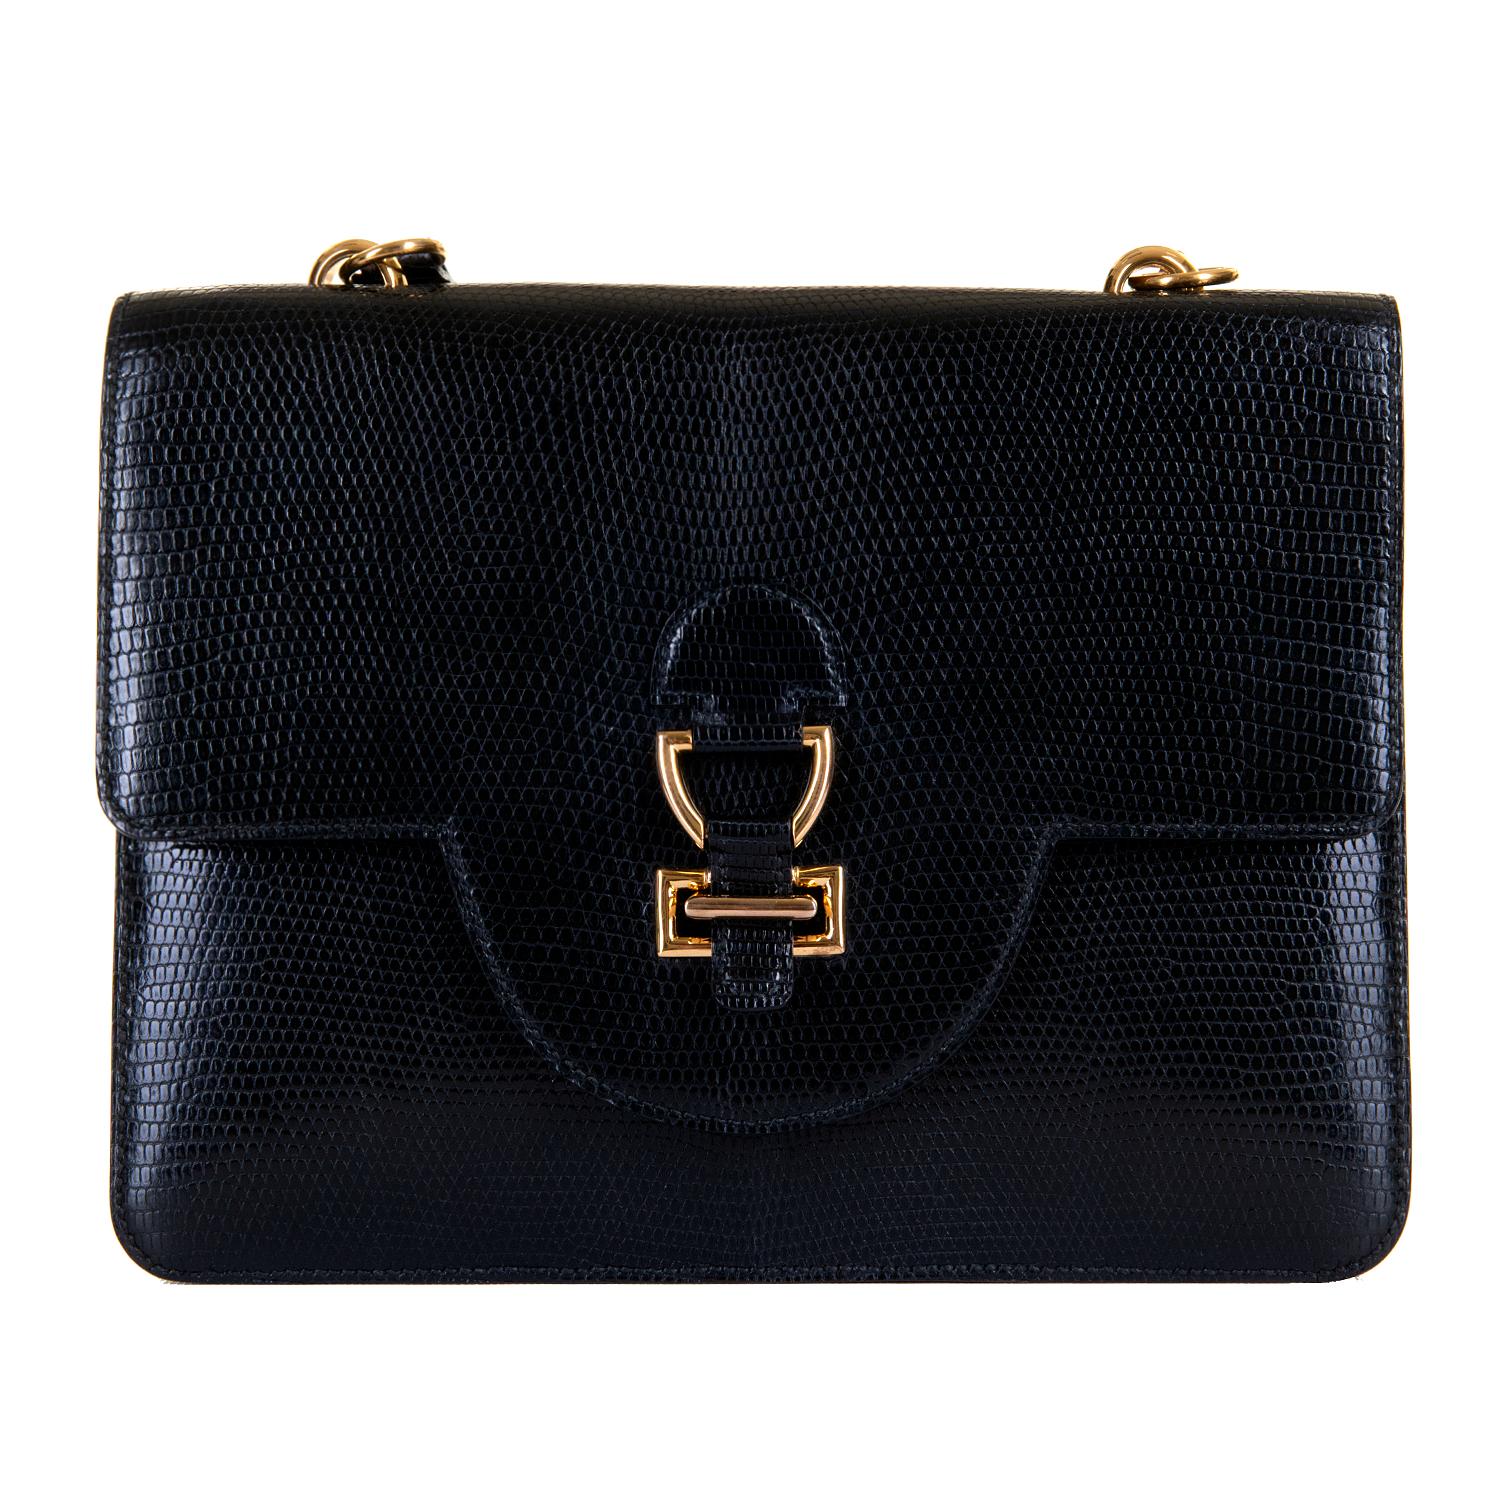 This much sought after Rare Hermes Bag, the 'Sandrine' was named after Sandrine Dumas, a French film actress and the daughter of Jean-Louis Dumas, the fifth generation of the family to run Hermes. The strap to this timeless classic  can be doubled